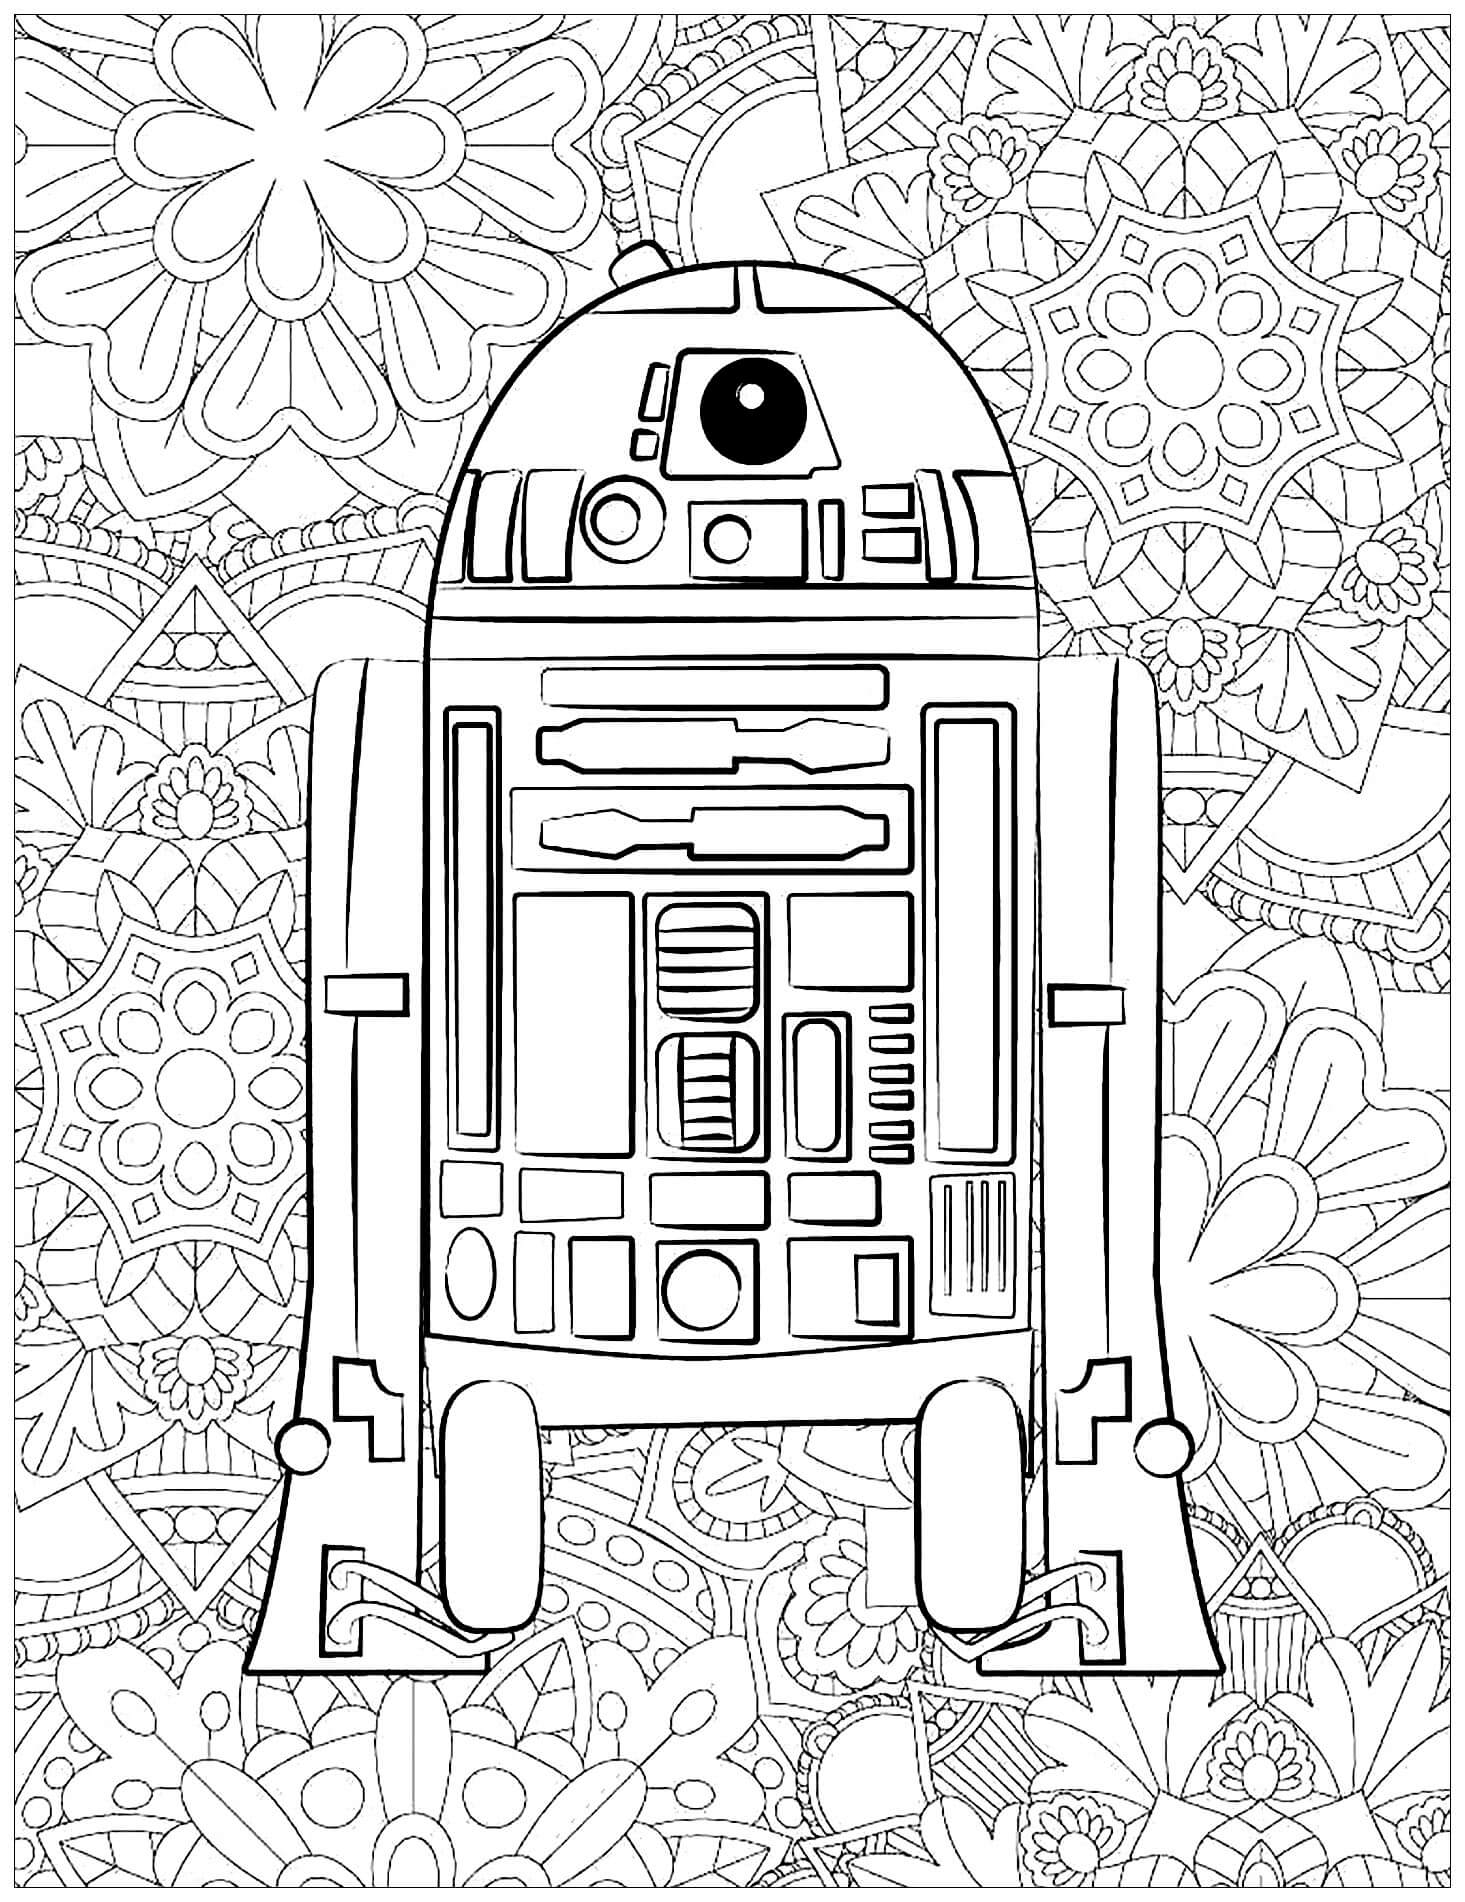 R2-D2 Star Wars coloring page